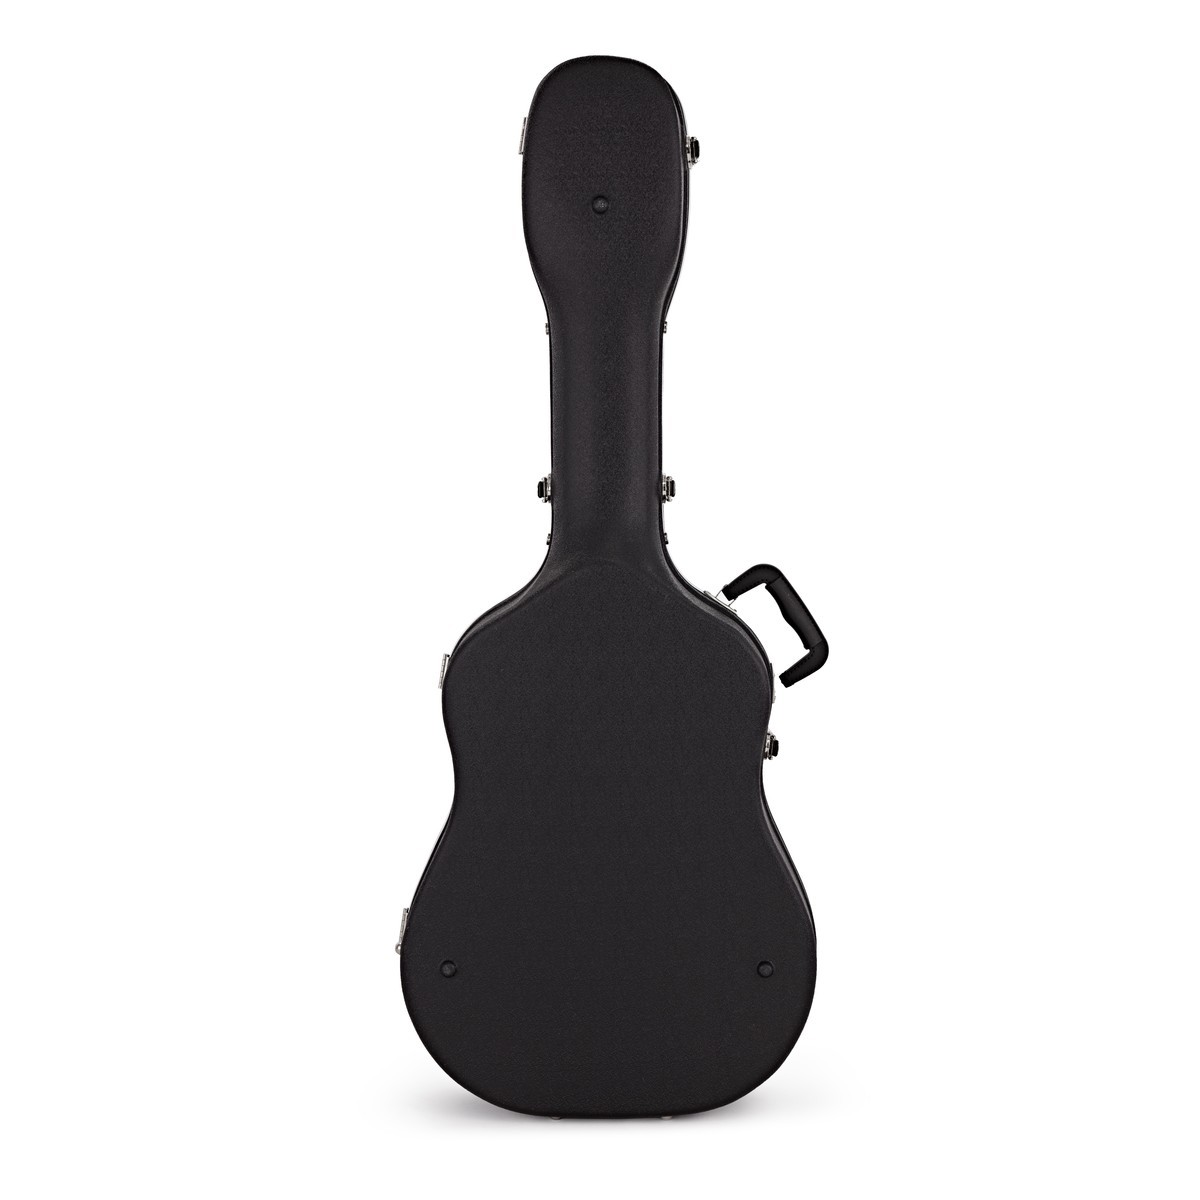 Cheap Black Full Size Acoustic Guitar Hard Case ABS With Padded Shoulder Straps for sale